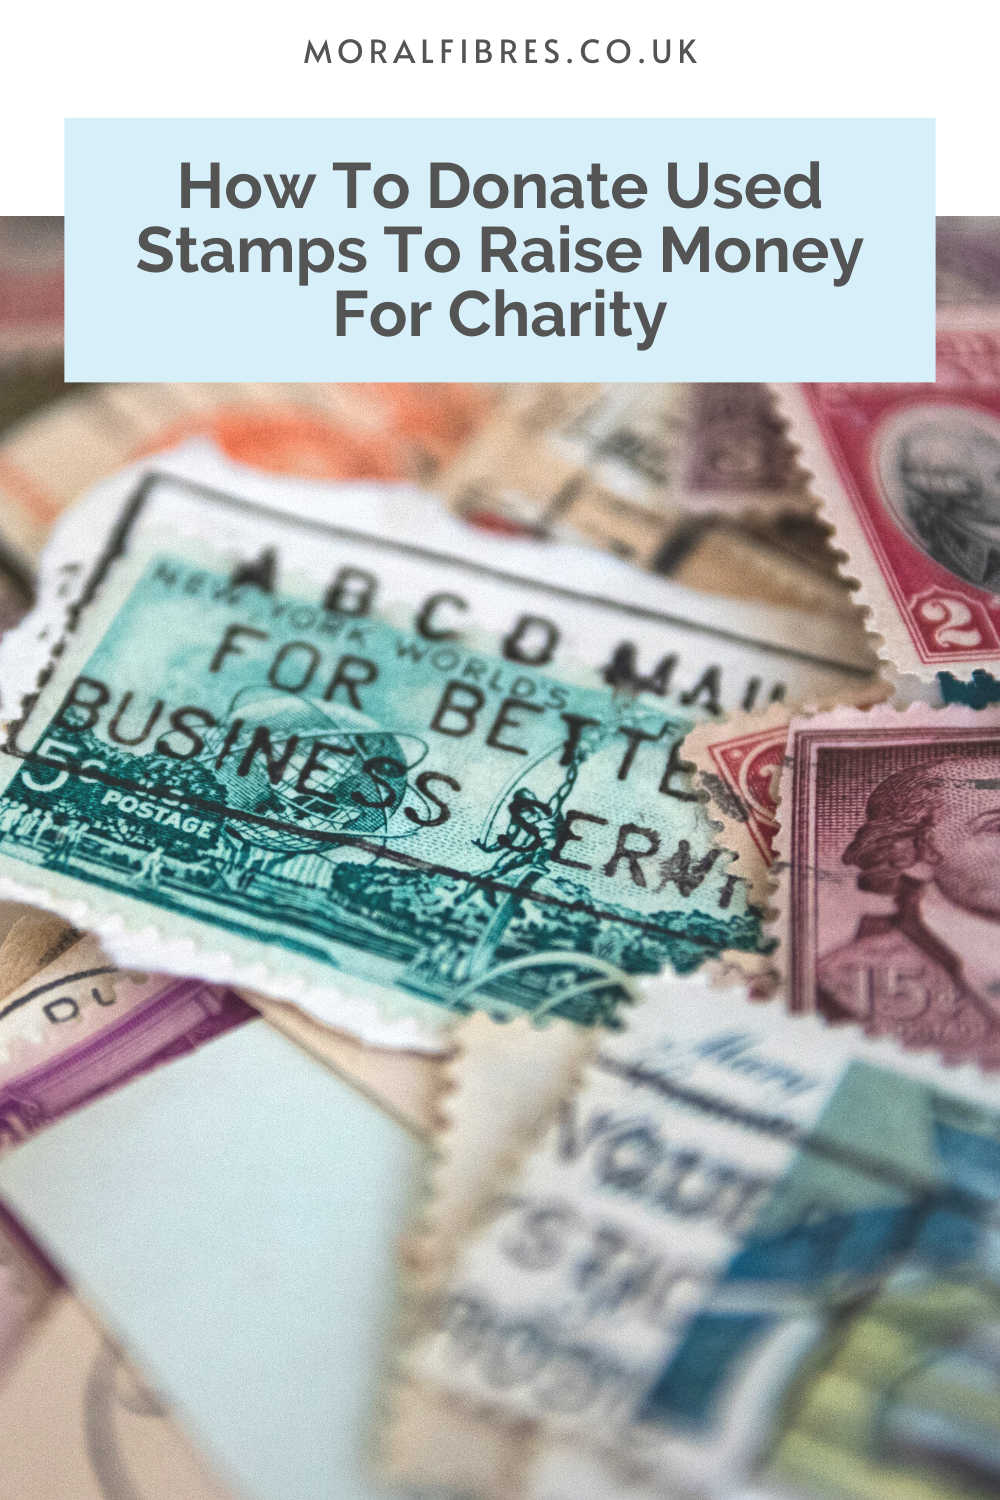 A collection of stamps, with a blue text box that reads how to donate used stamps to raise money for charity.